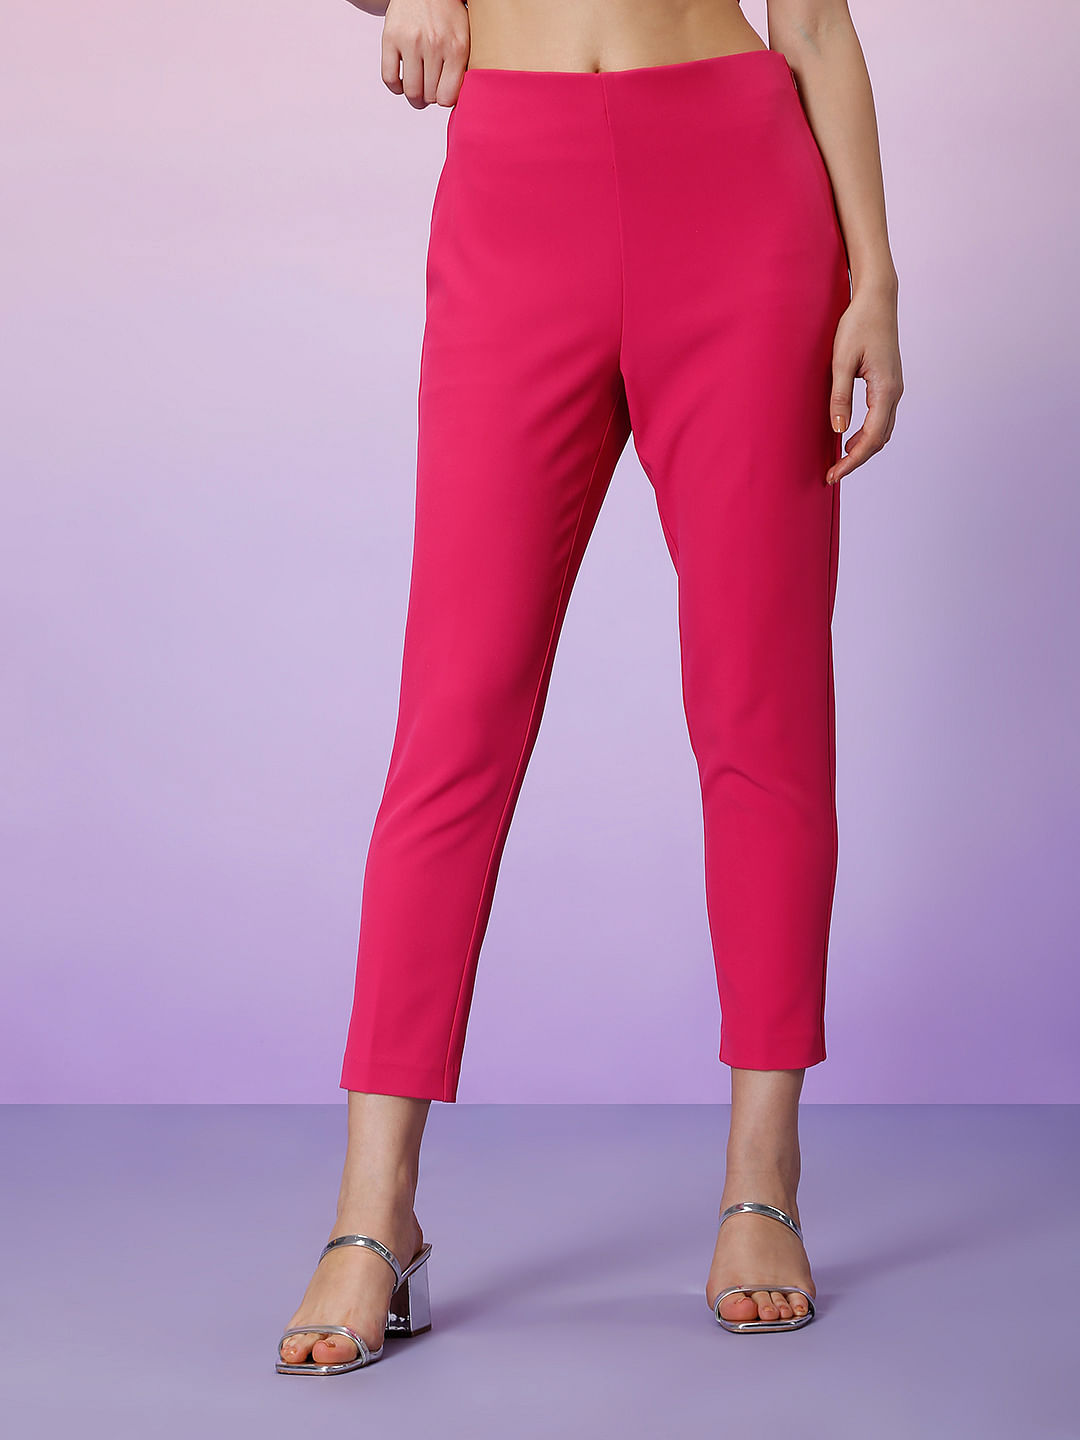 Take Your Time Hot Pink High Waist Wide Leg Trousers – Club L London - USA